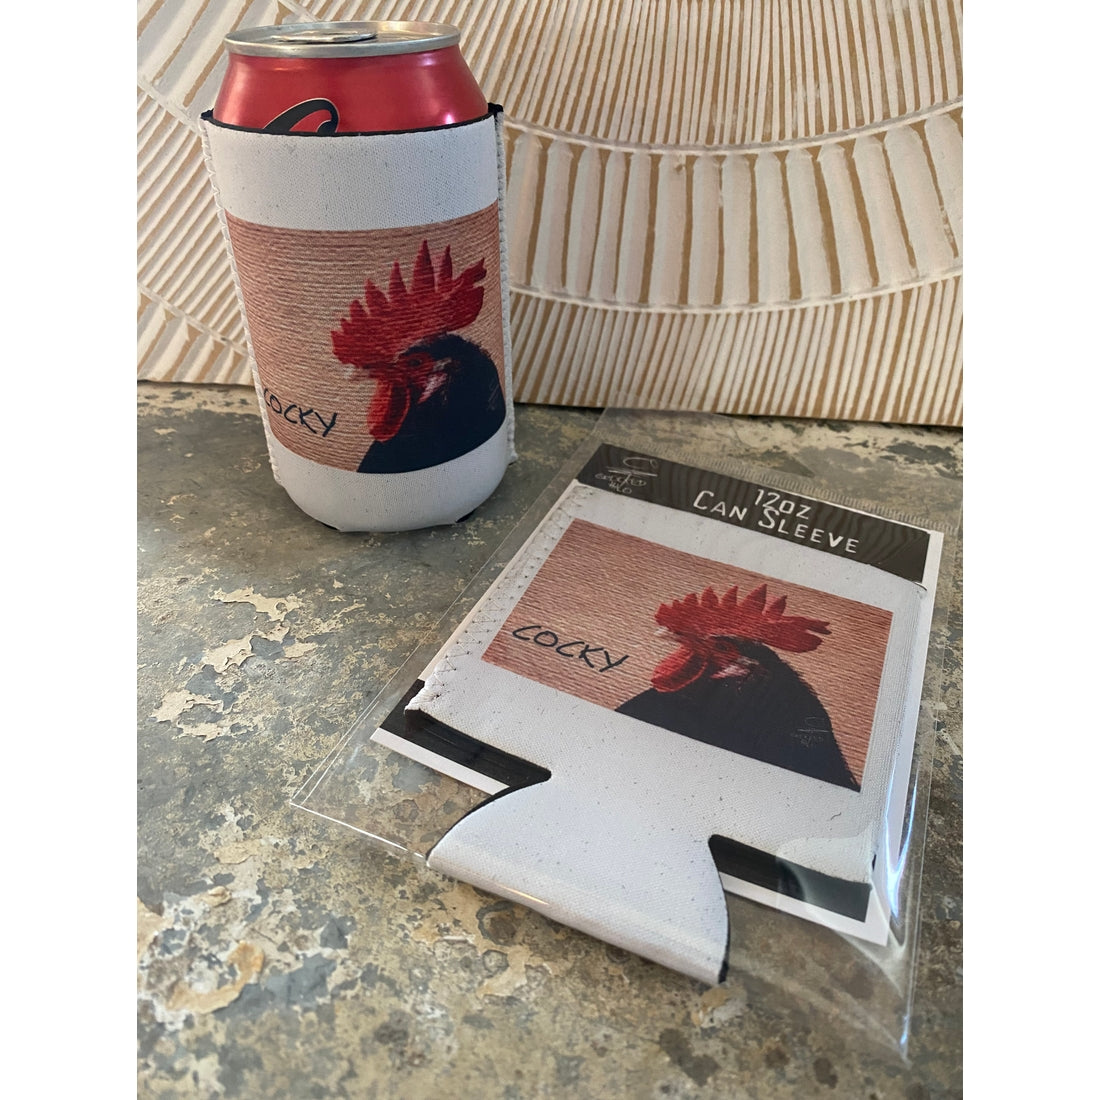 "Cocky" Rooster Neoprene Can Sleeve